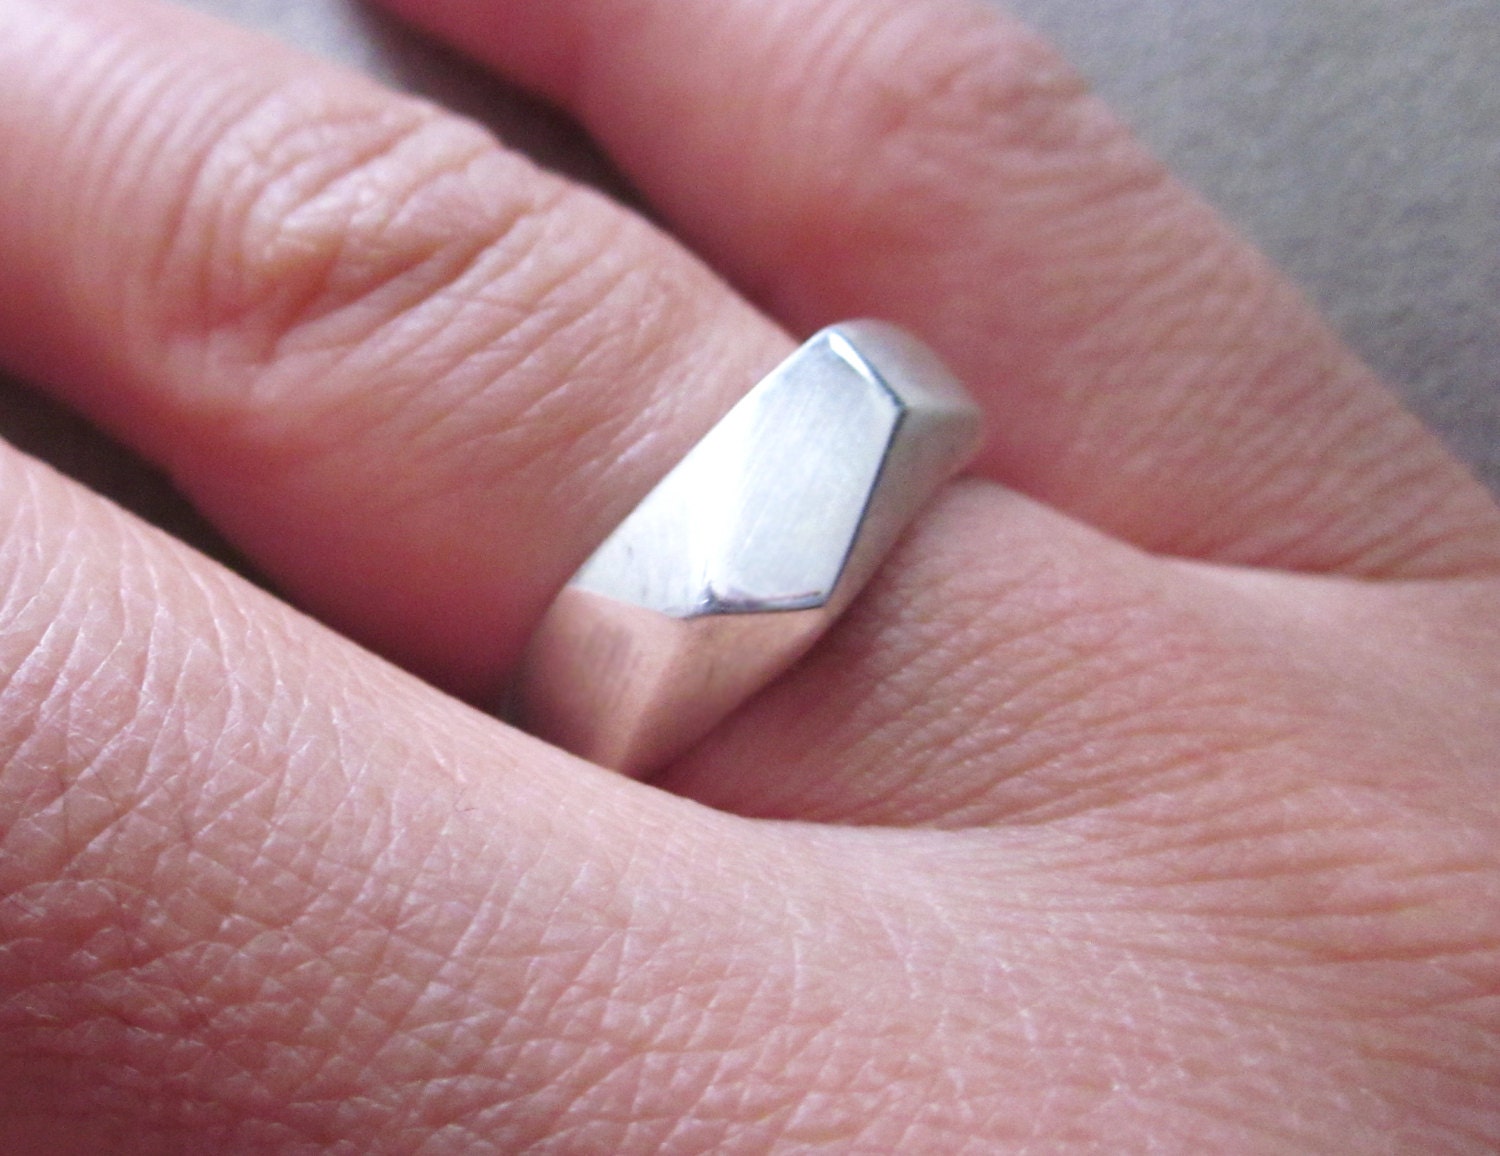 Abstract Geometric Ring